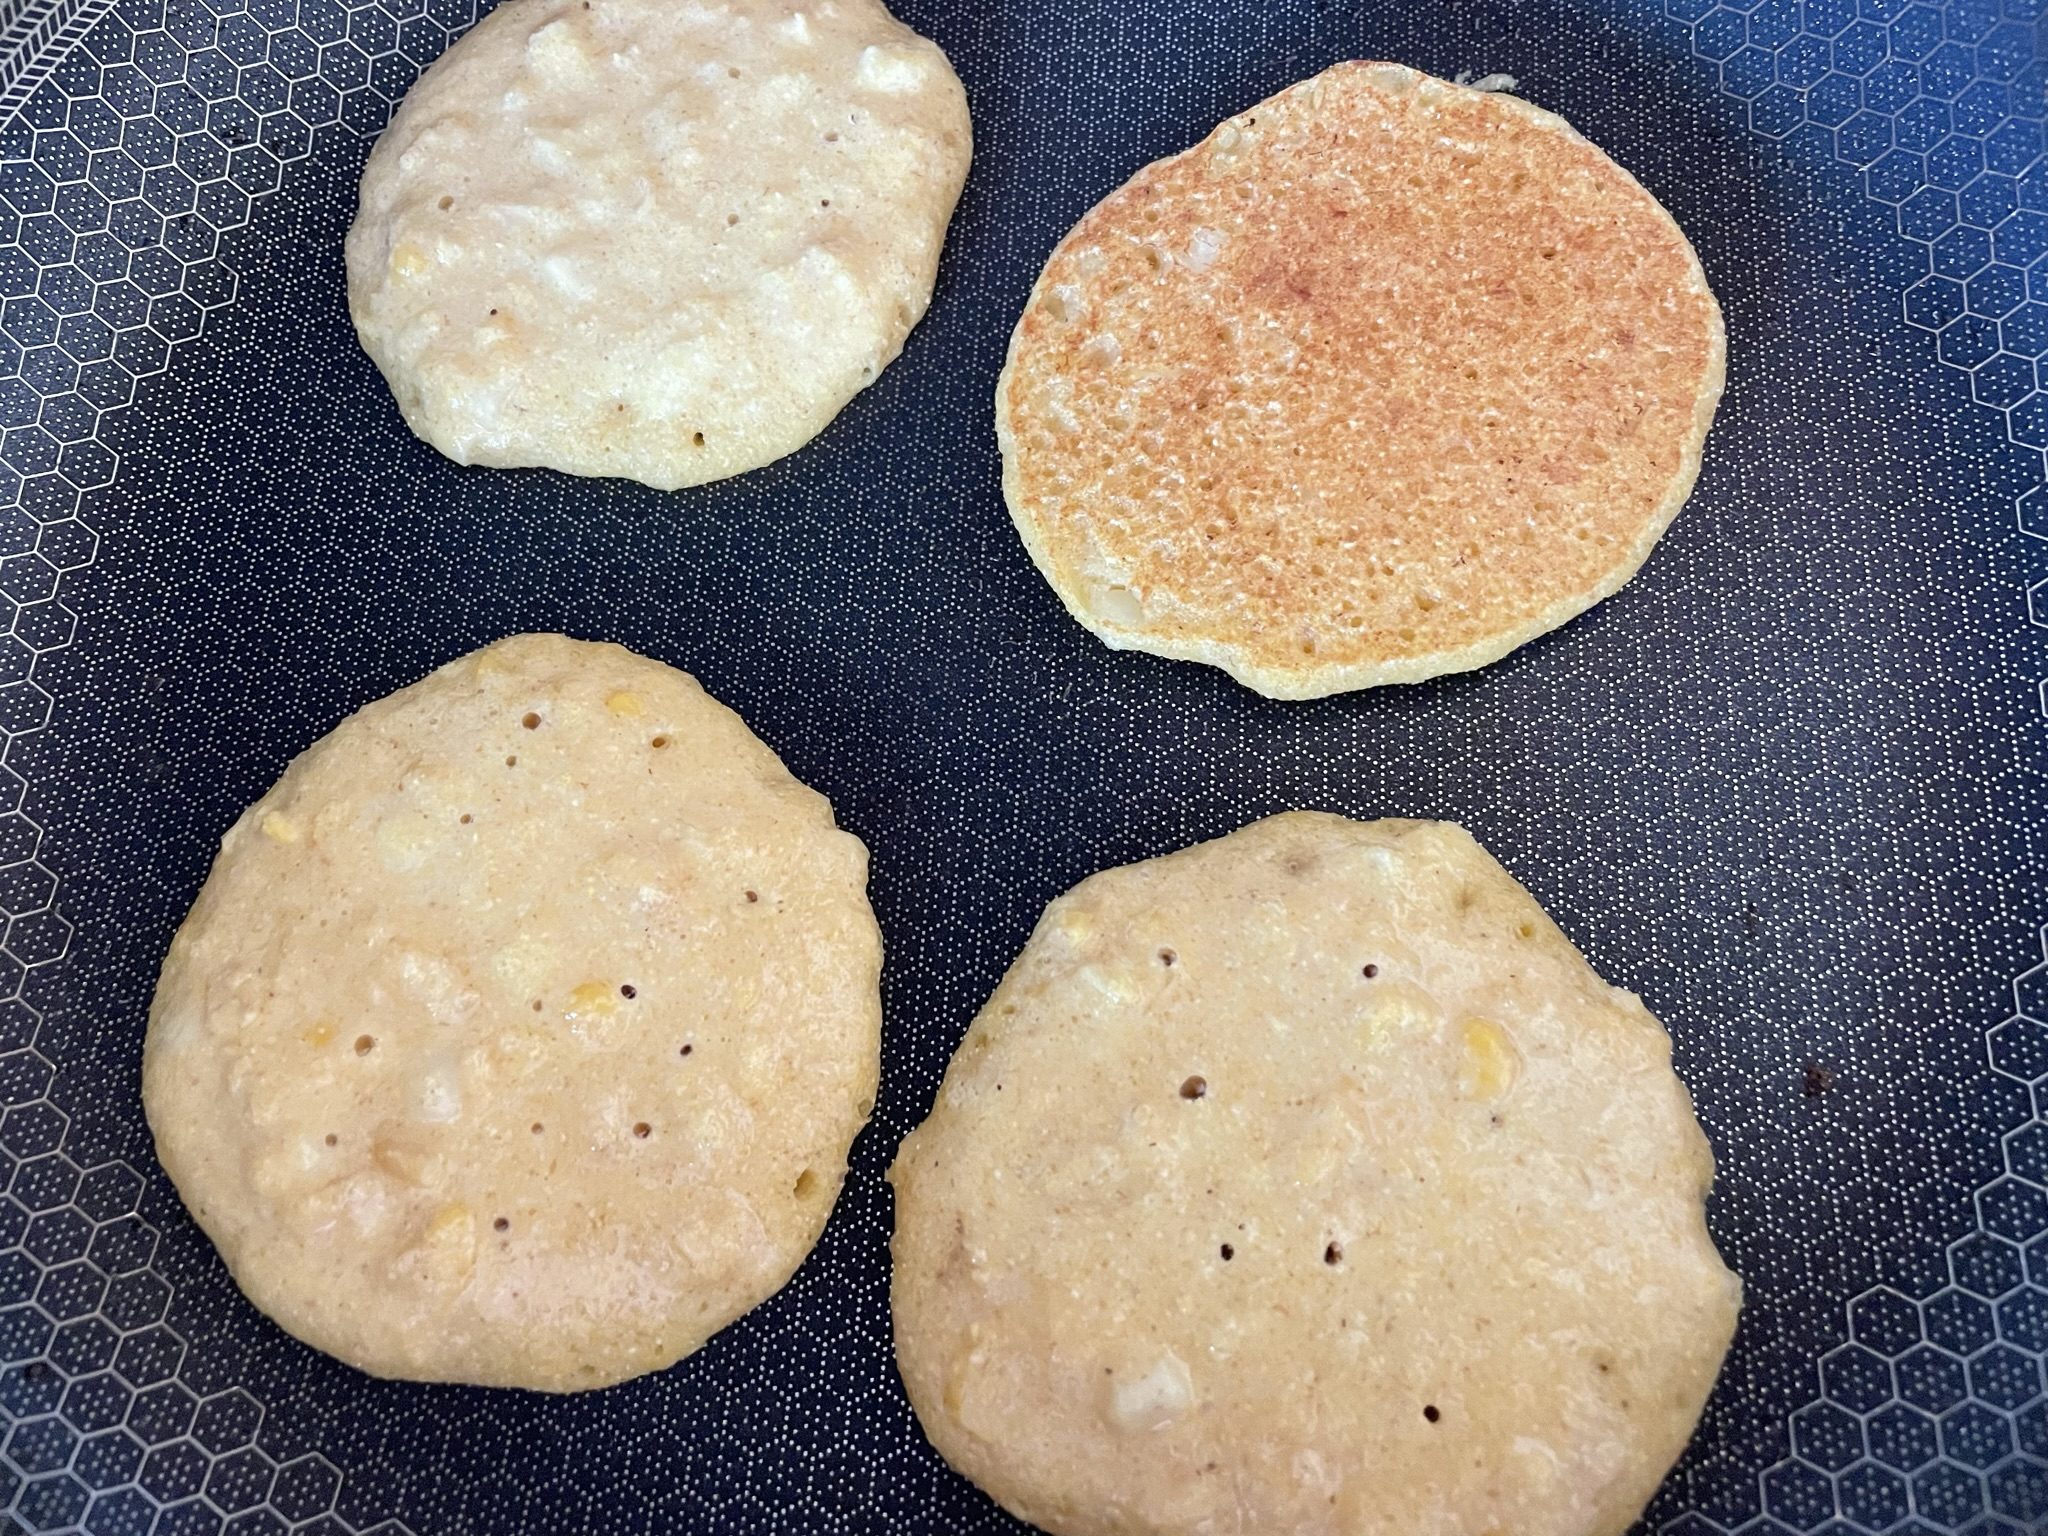 Flip pancakes when the sides appear cooked